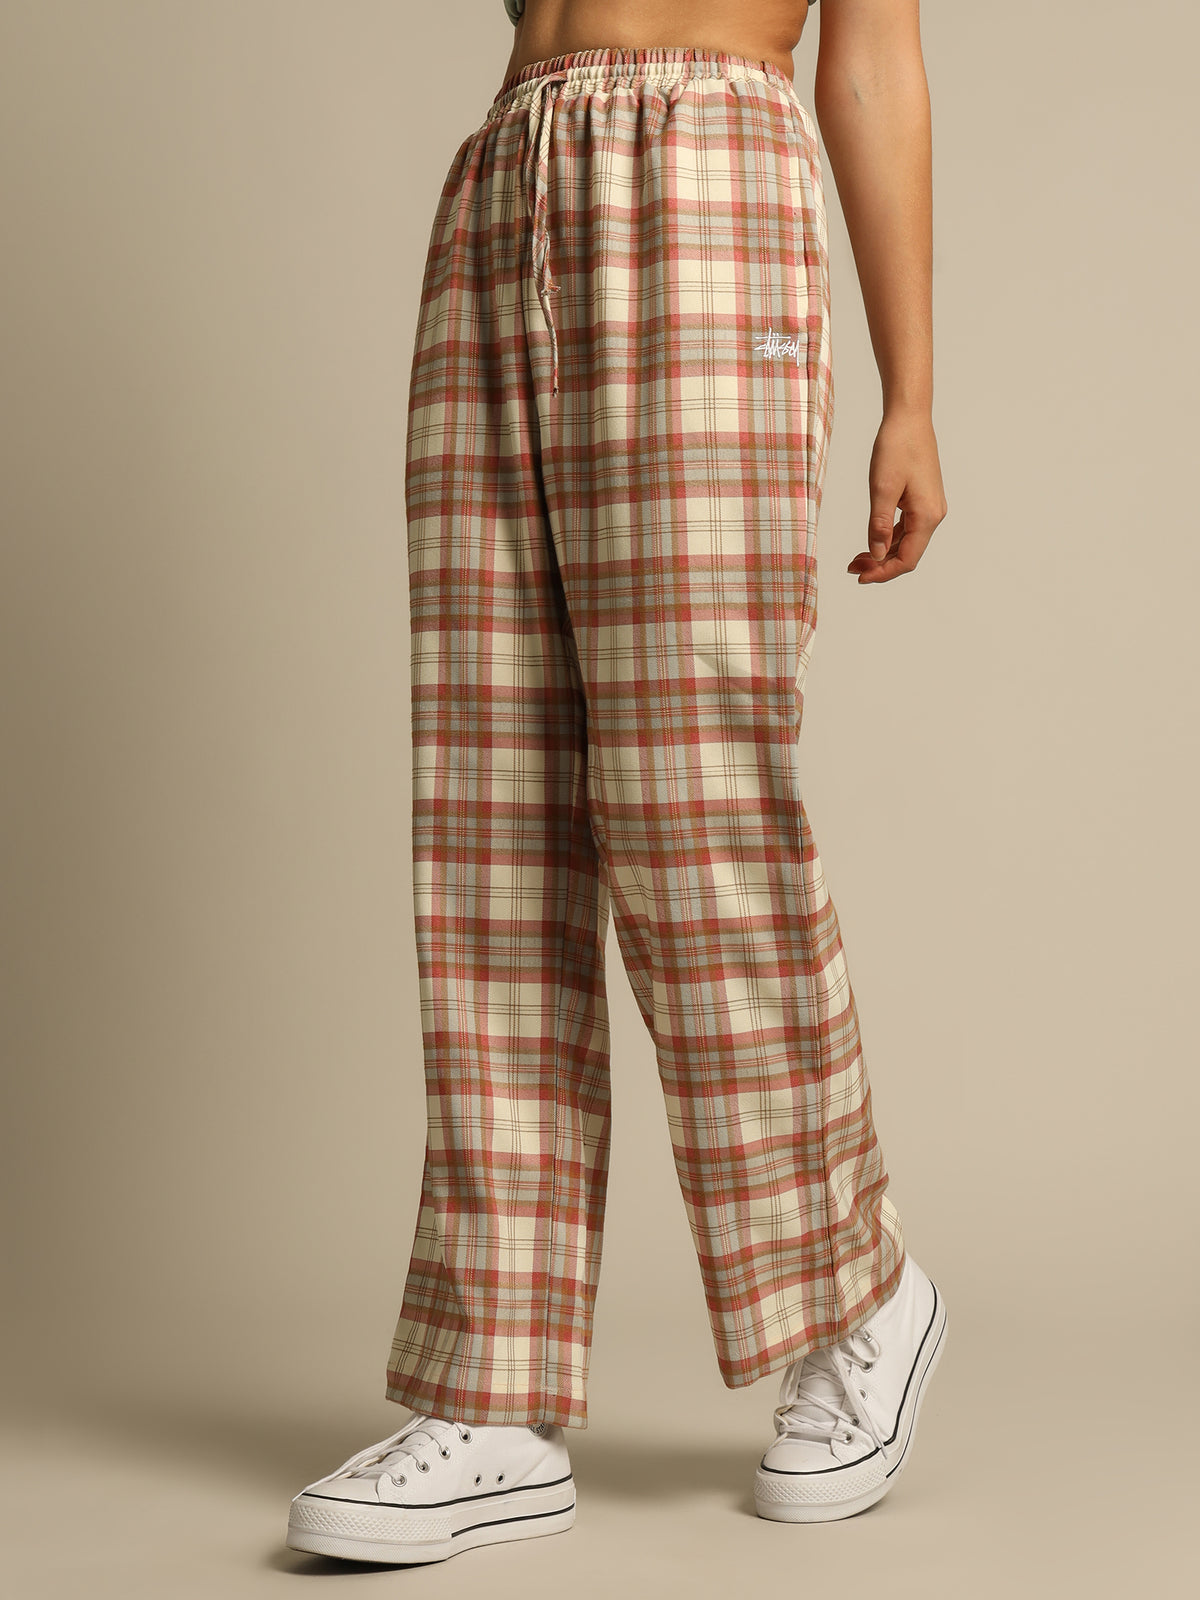 Sutton Check Pants in Off White